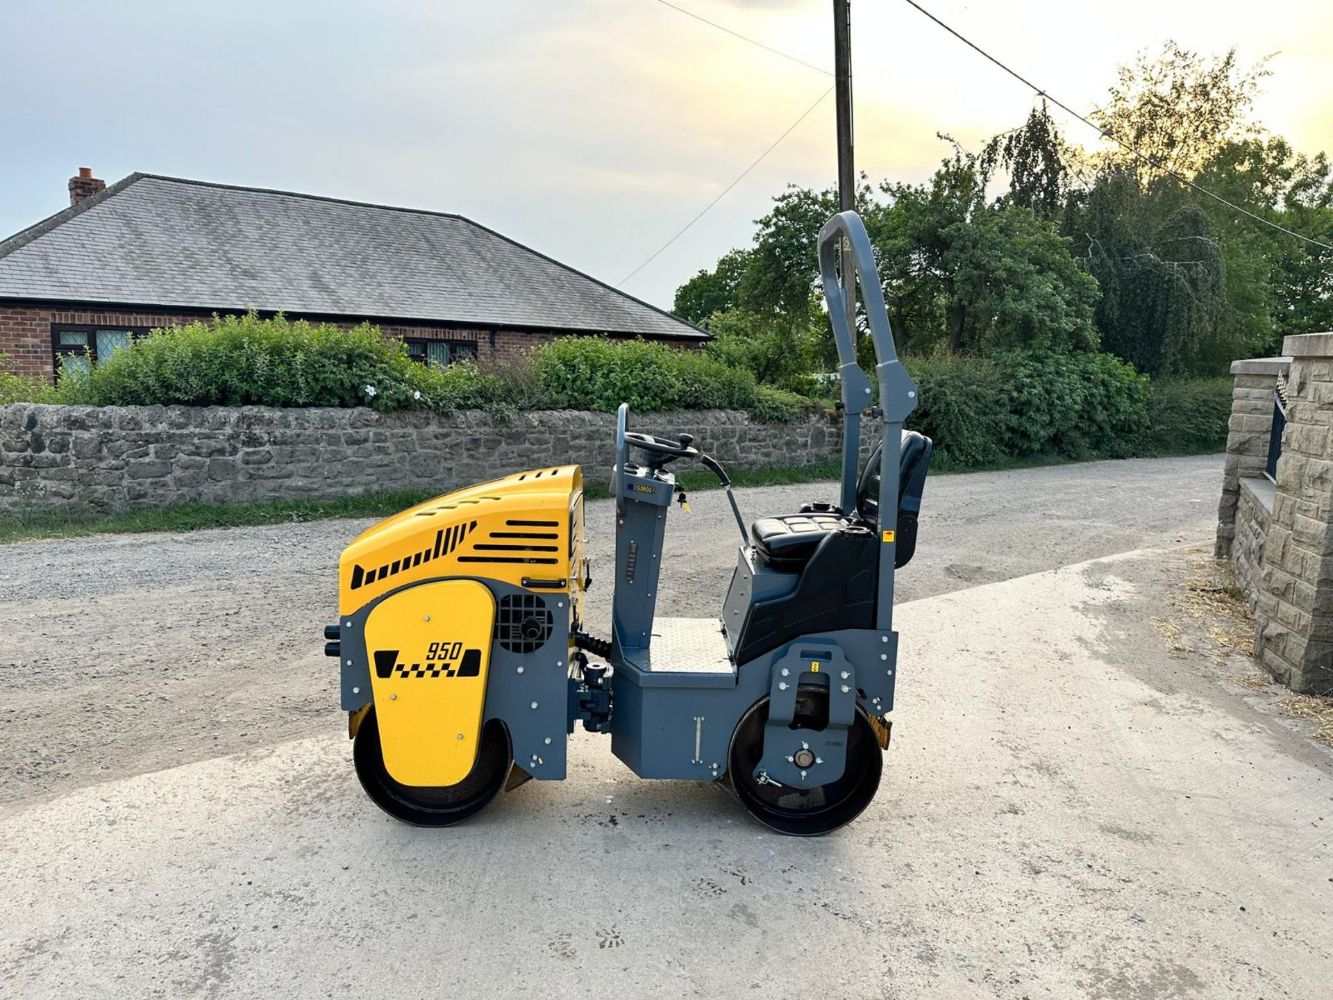 FRIDAY AFTERNOON SALE! ENDS FROM 1PM INCLUDES TARMAC PLANER, 14TON EXCAVATOR, SCARAB SWEEPER, LAND ROVER, DUMPERS, DIGGER, FORKLIFTS & MUCH MORE